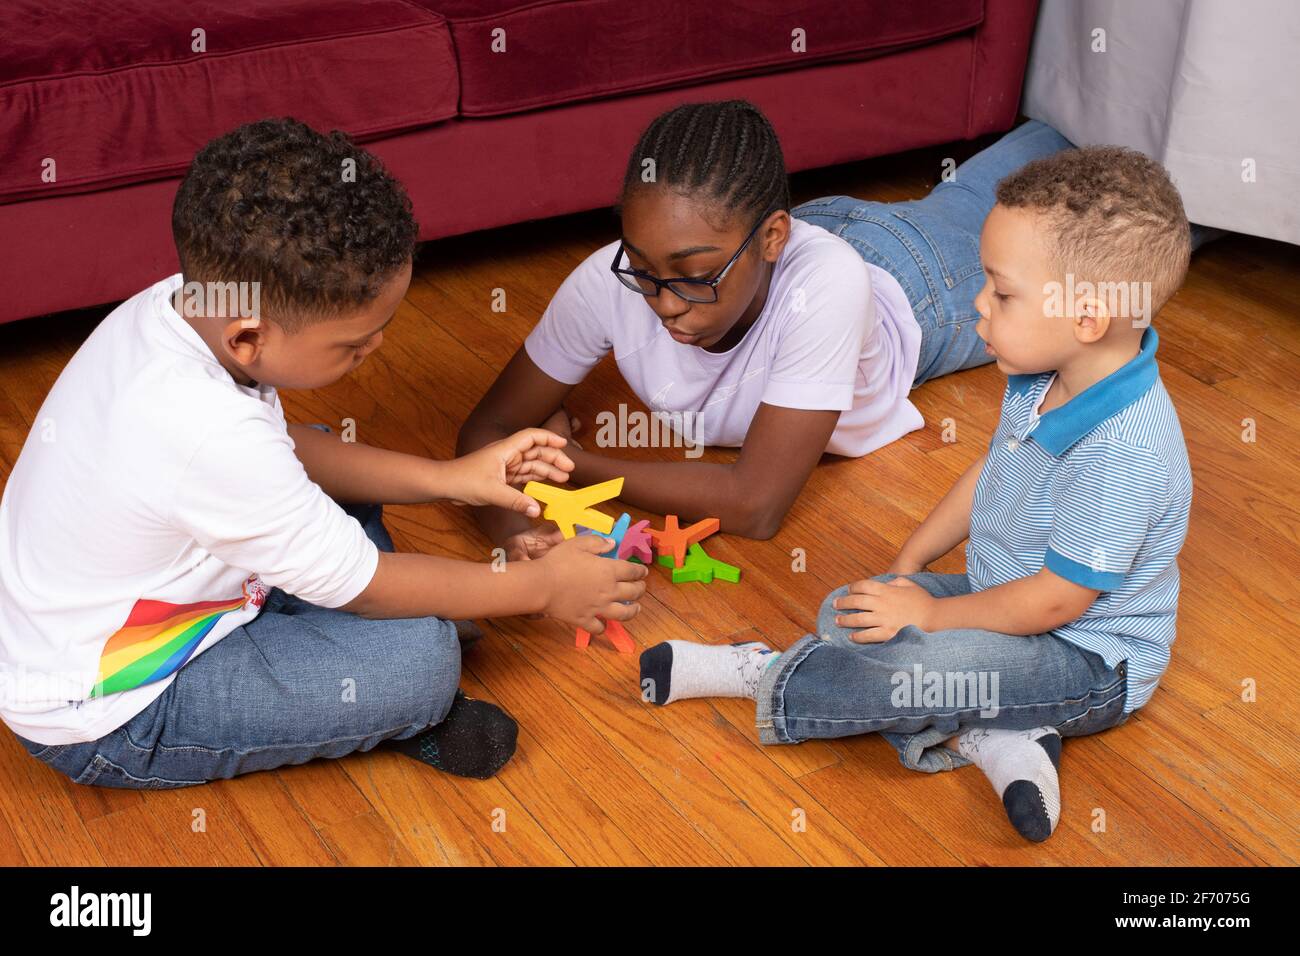 7 year old boy playing with wooden stacking pieces balancing game with 12 year old half-sister, 3 year old brother looking on learning by observing Stock Photo